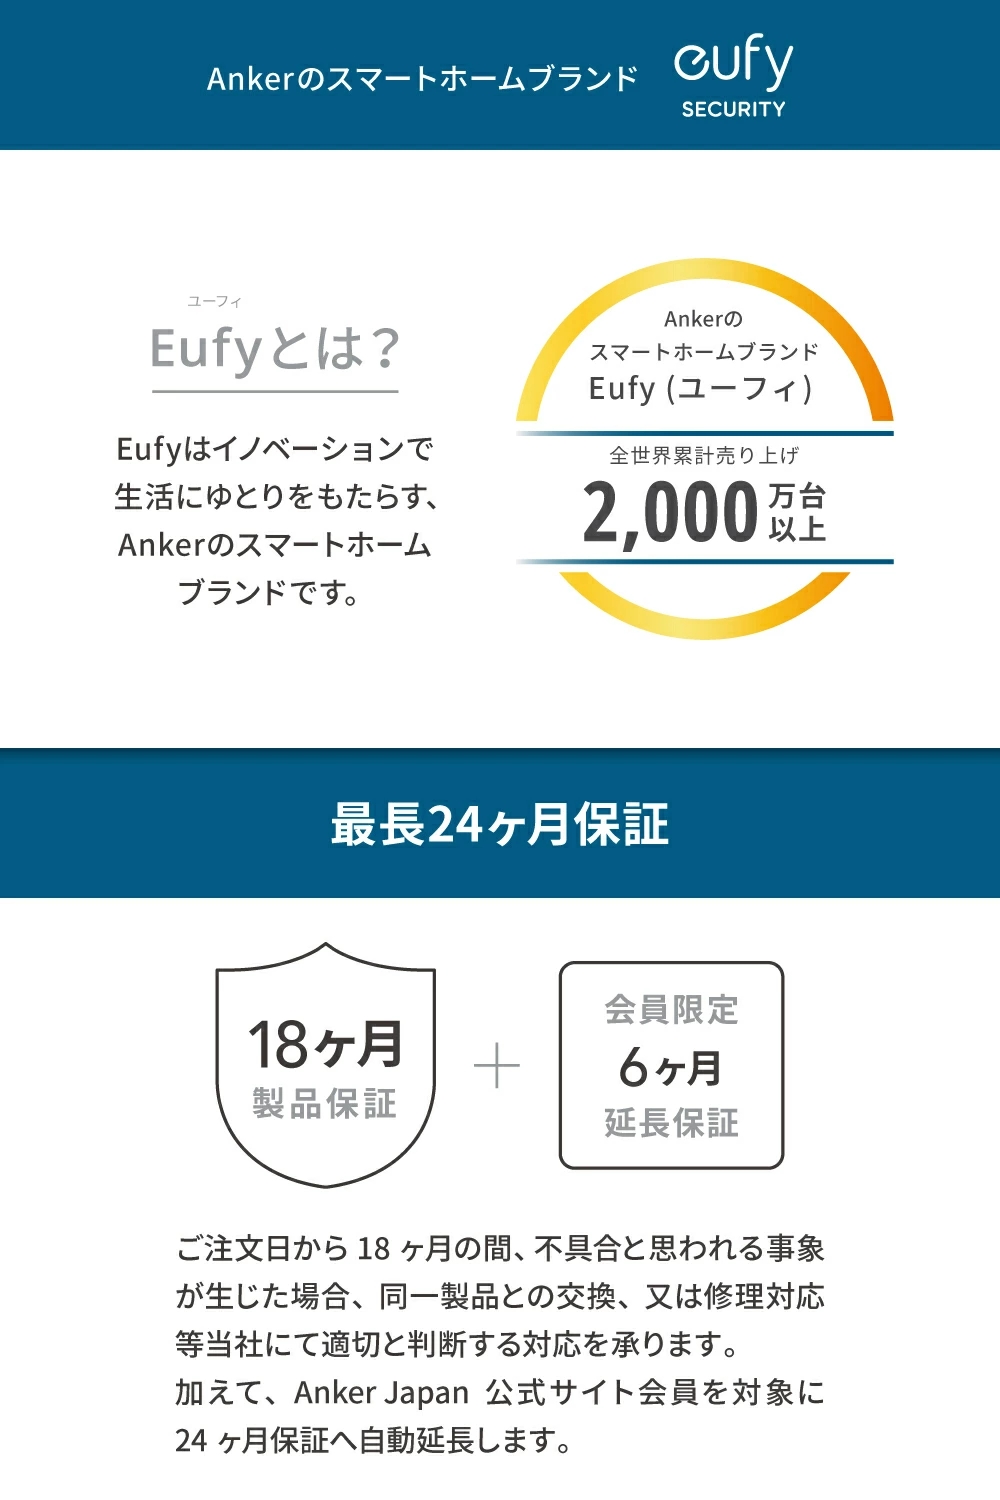 Anker Eufy (ユーフィ) Security SmartTrack Link 4個セット (紛失防止